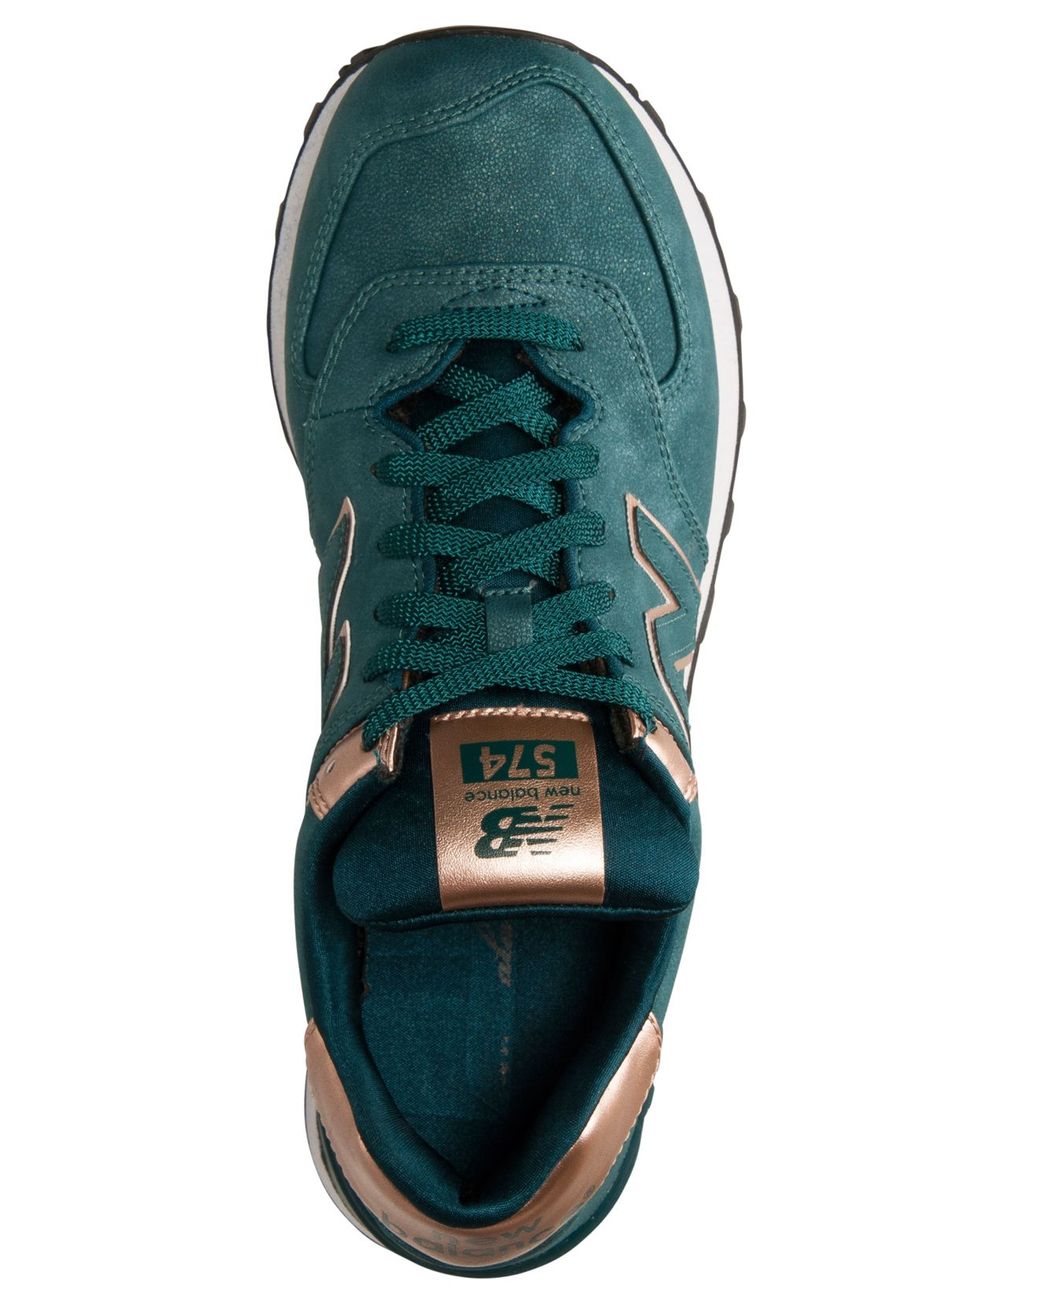 New Balance Women's 574 Precious Metals Casual Sneakers Finish Line in Green | Lyst